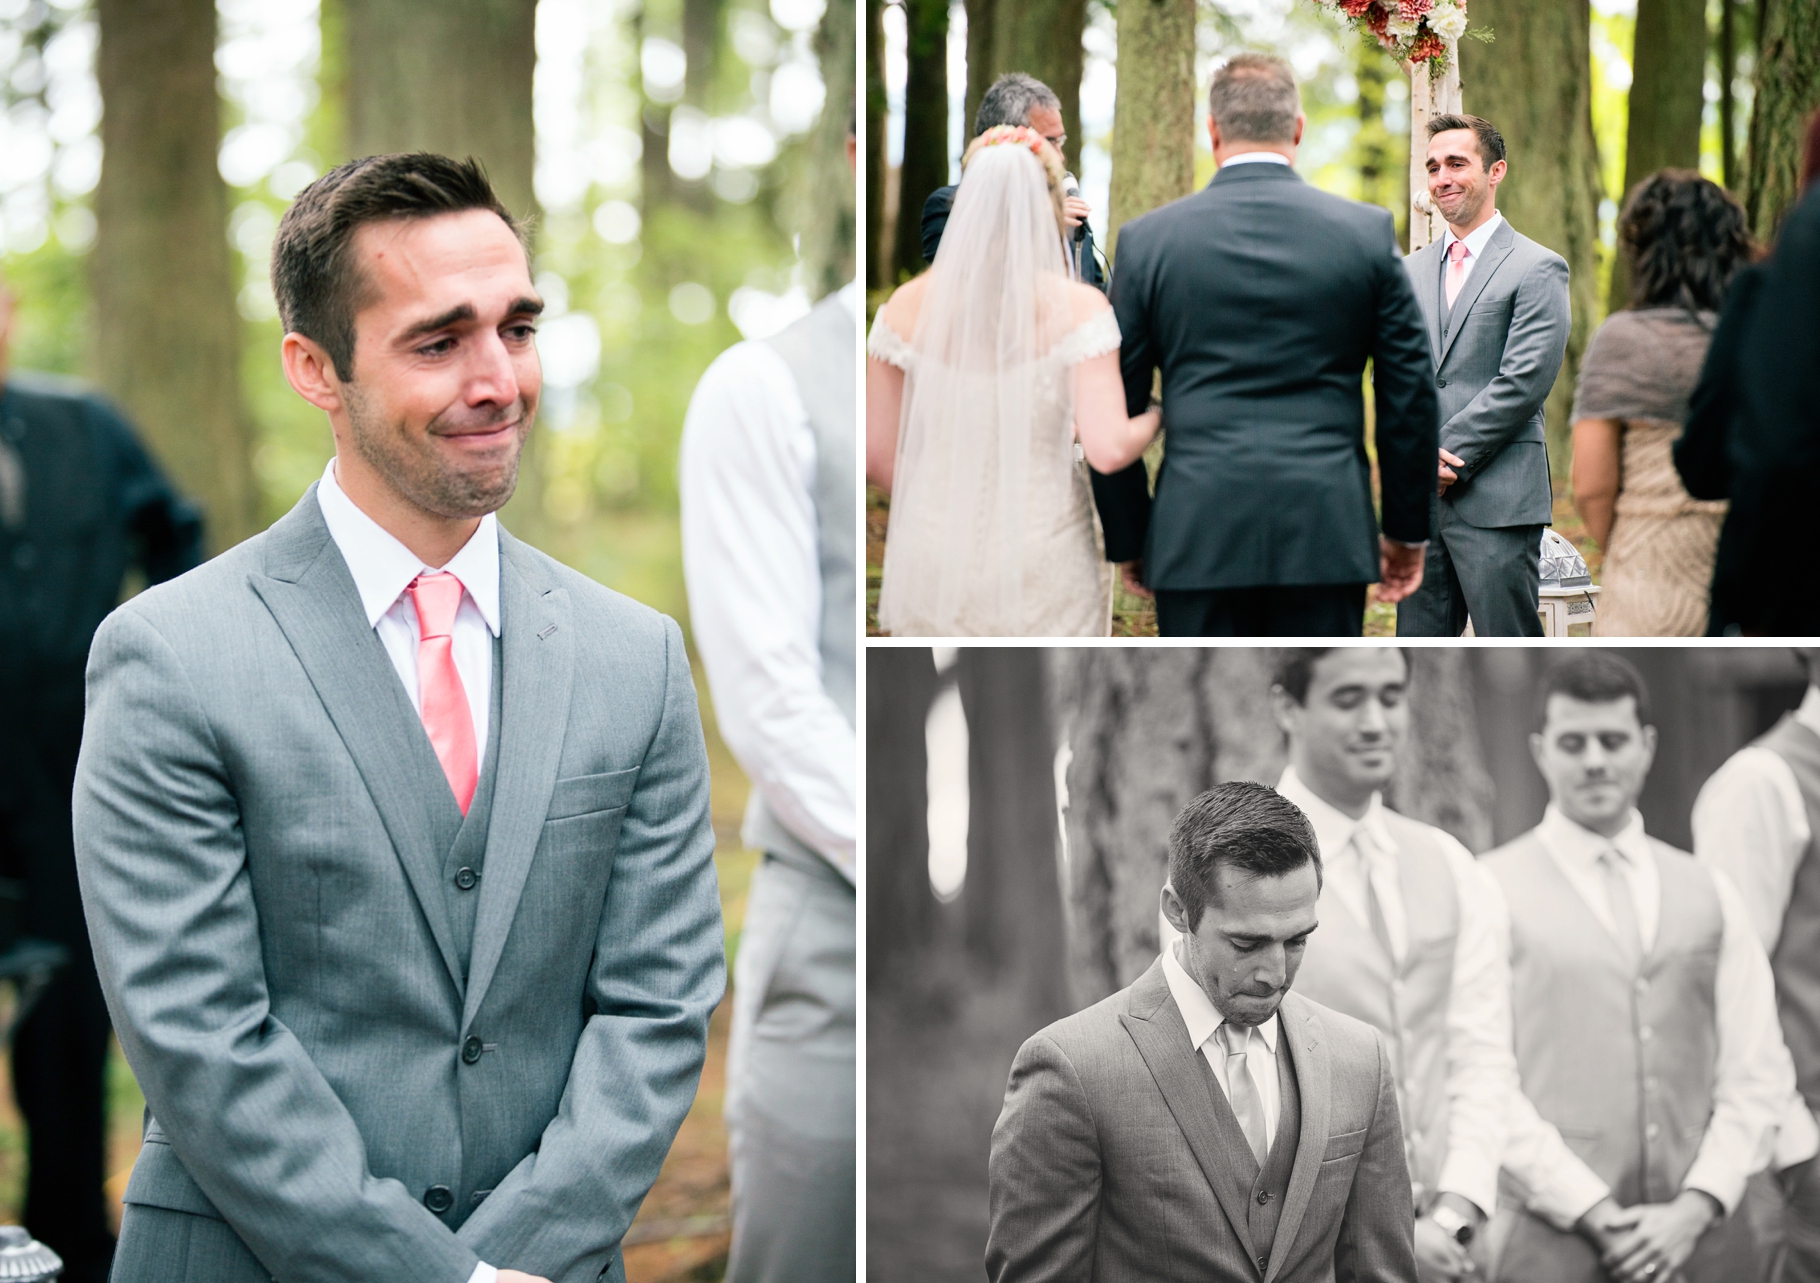 32-Ceremony-Bride-Groom-Reaction-wooded-bluff-olympic-mountains-Kitsap-Memorial-State-Park-Forest-Northwest-Photographer-Seattle-Wedding-Photography-by-Betty-Elaine